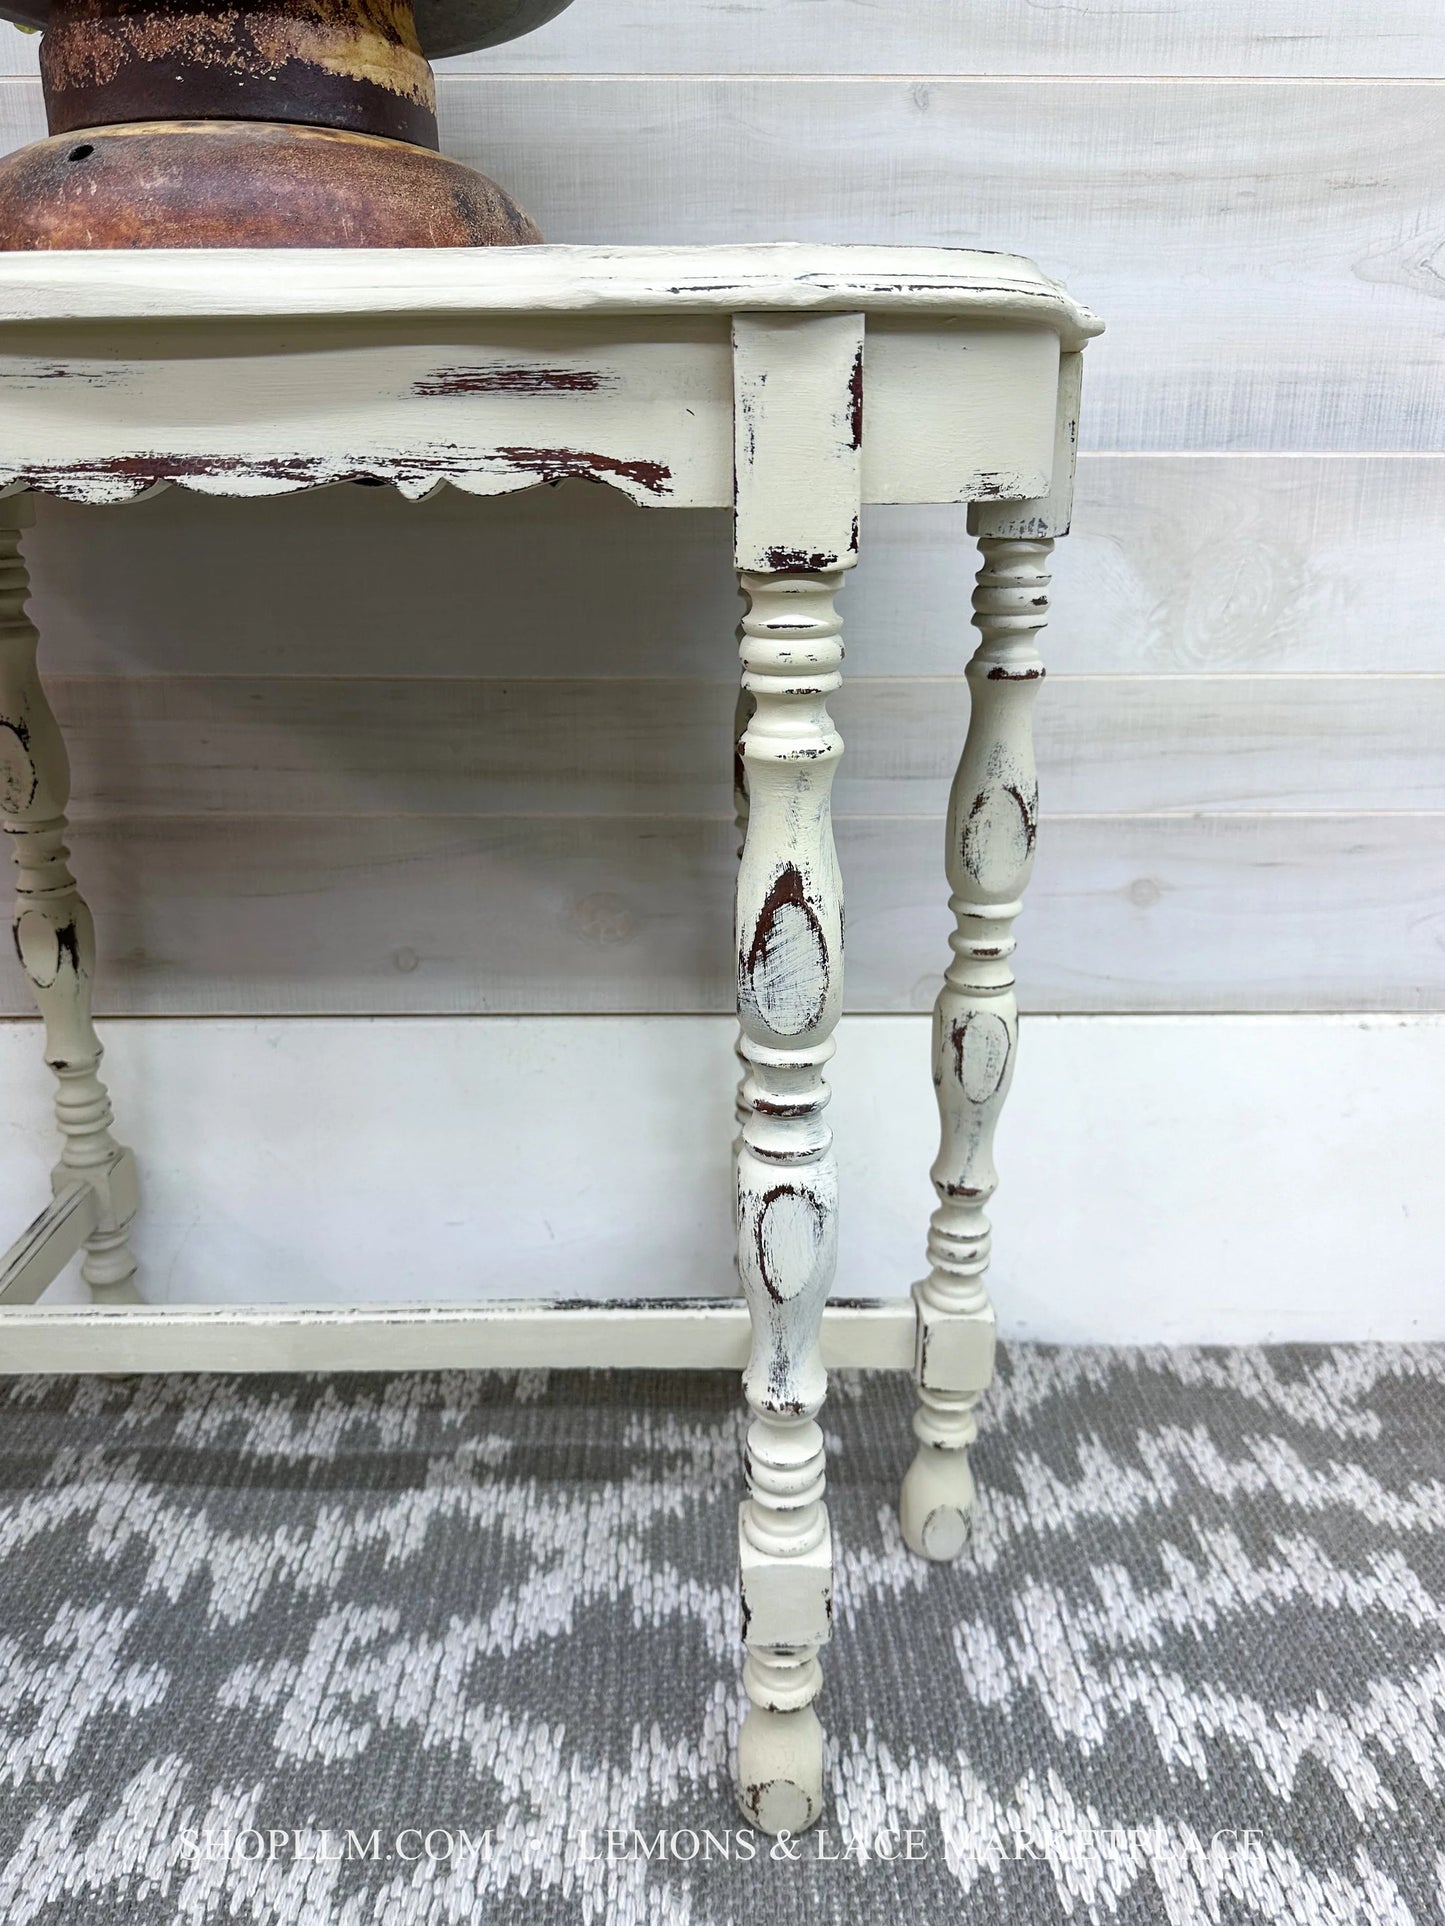 Country Grey Chalk Paint®